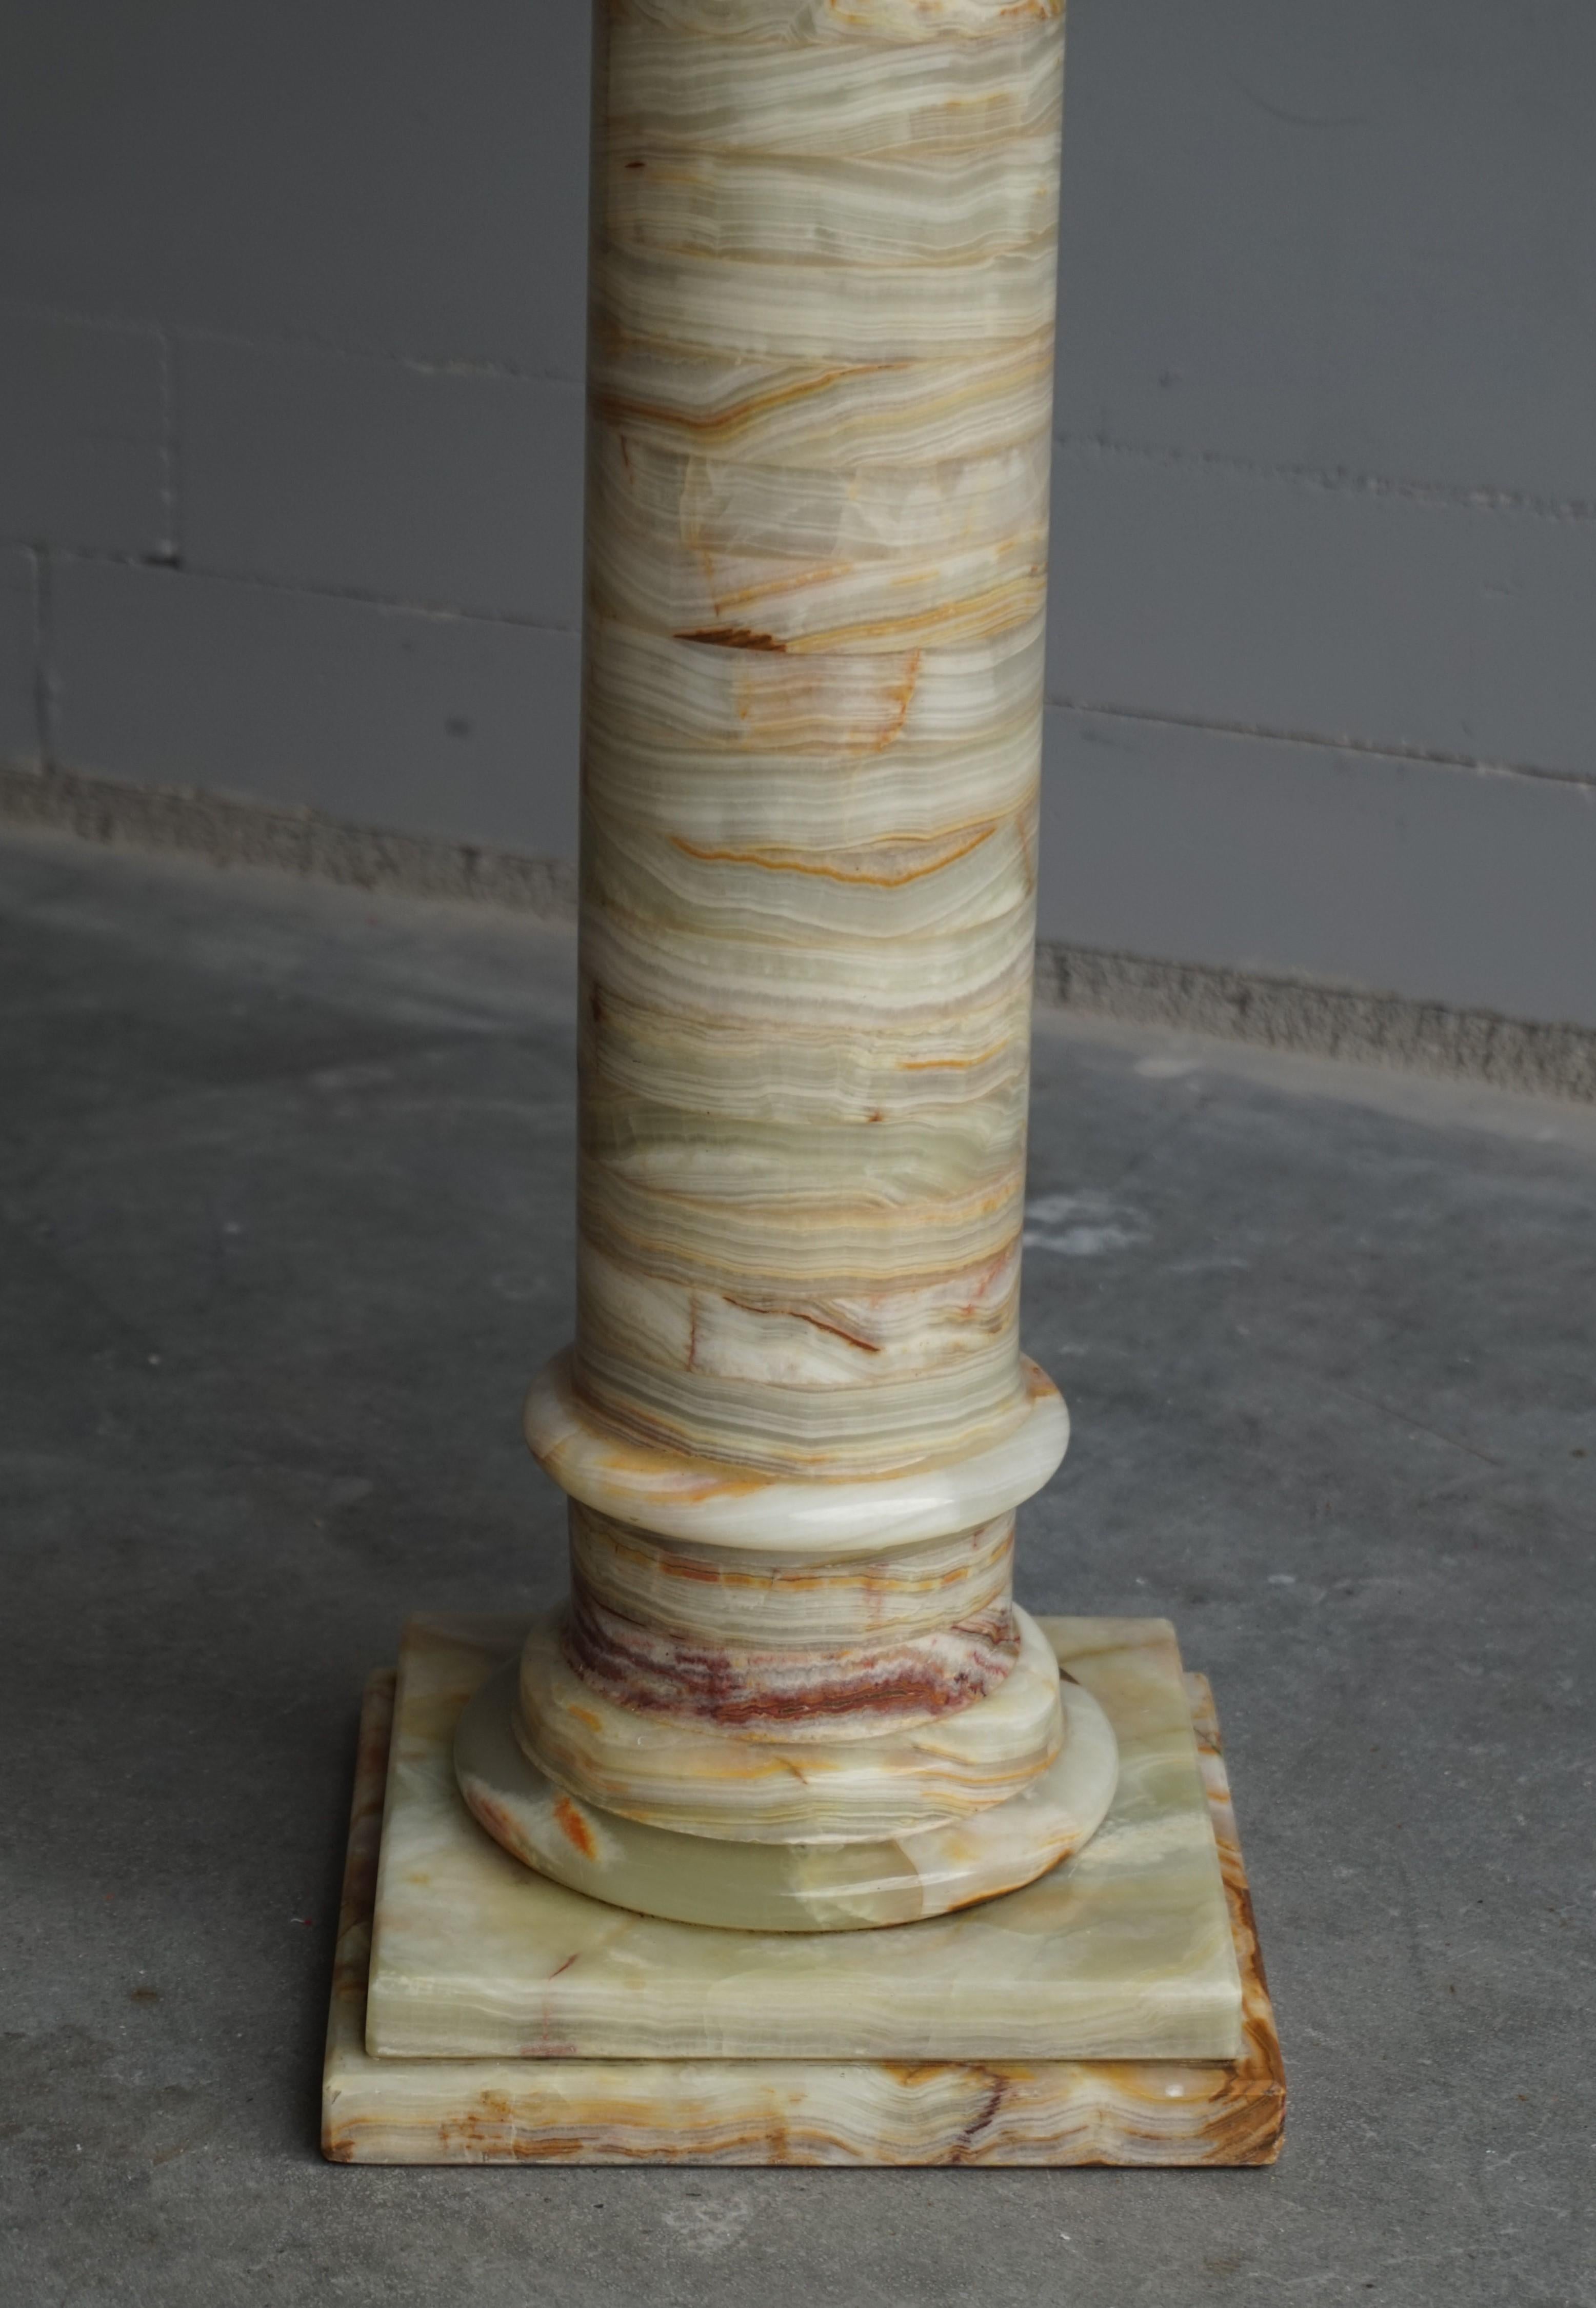 Hand-Crafted Handmade & Stunning Onyx Mineral Stone Tuscan Column Pedestal / Sculpture Stand